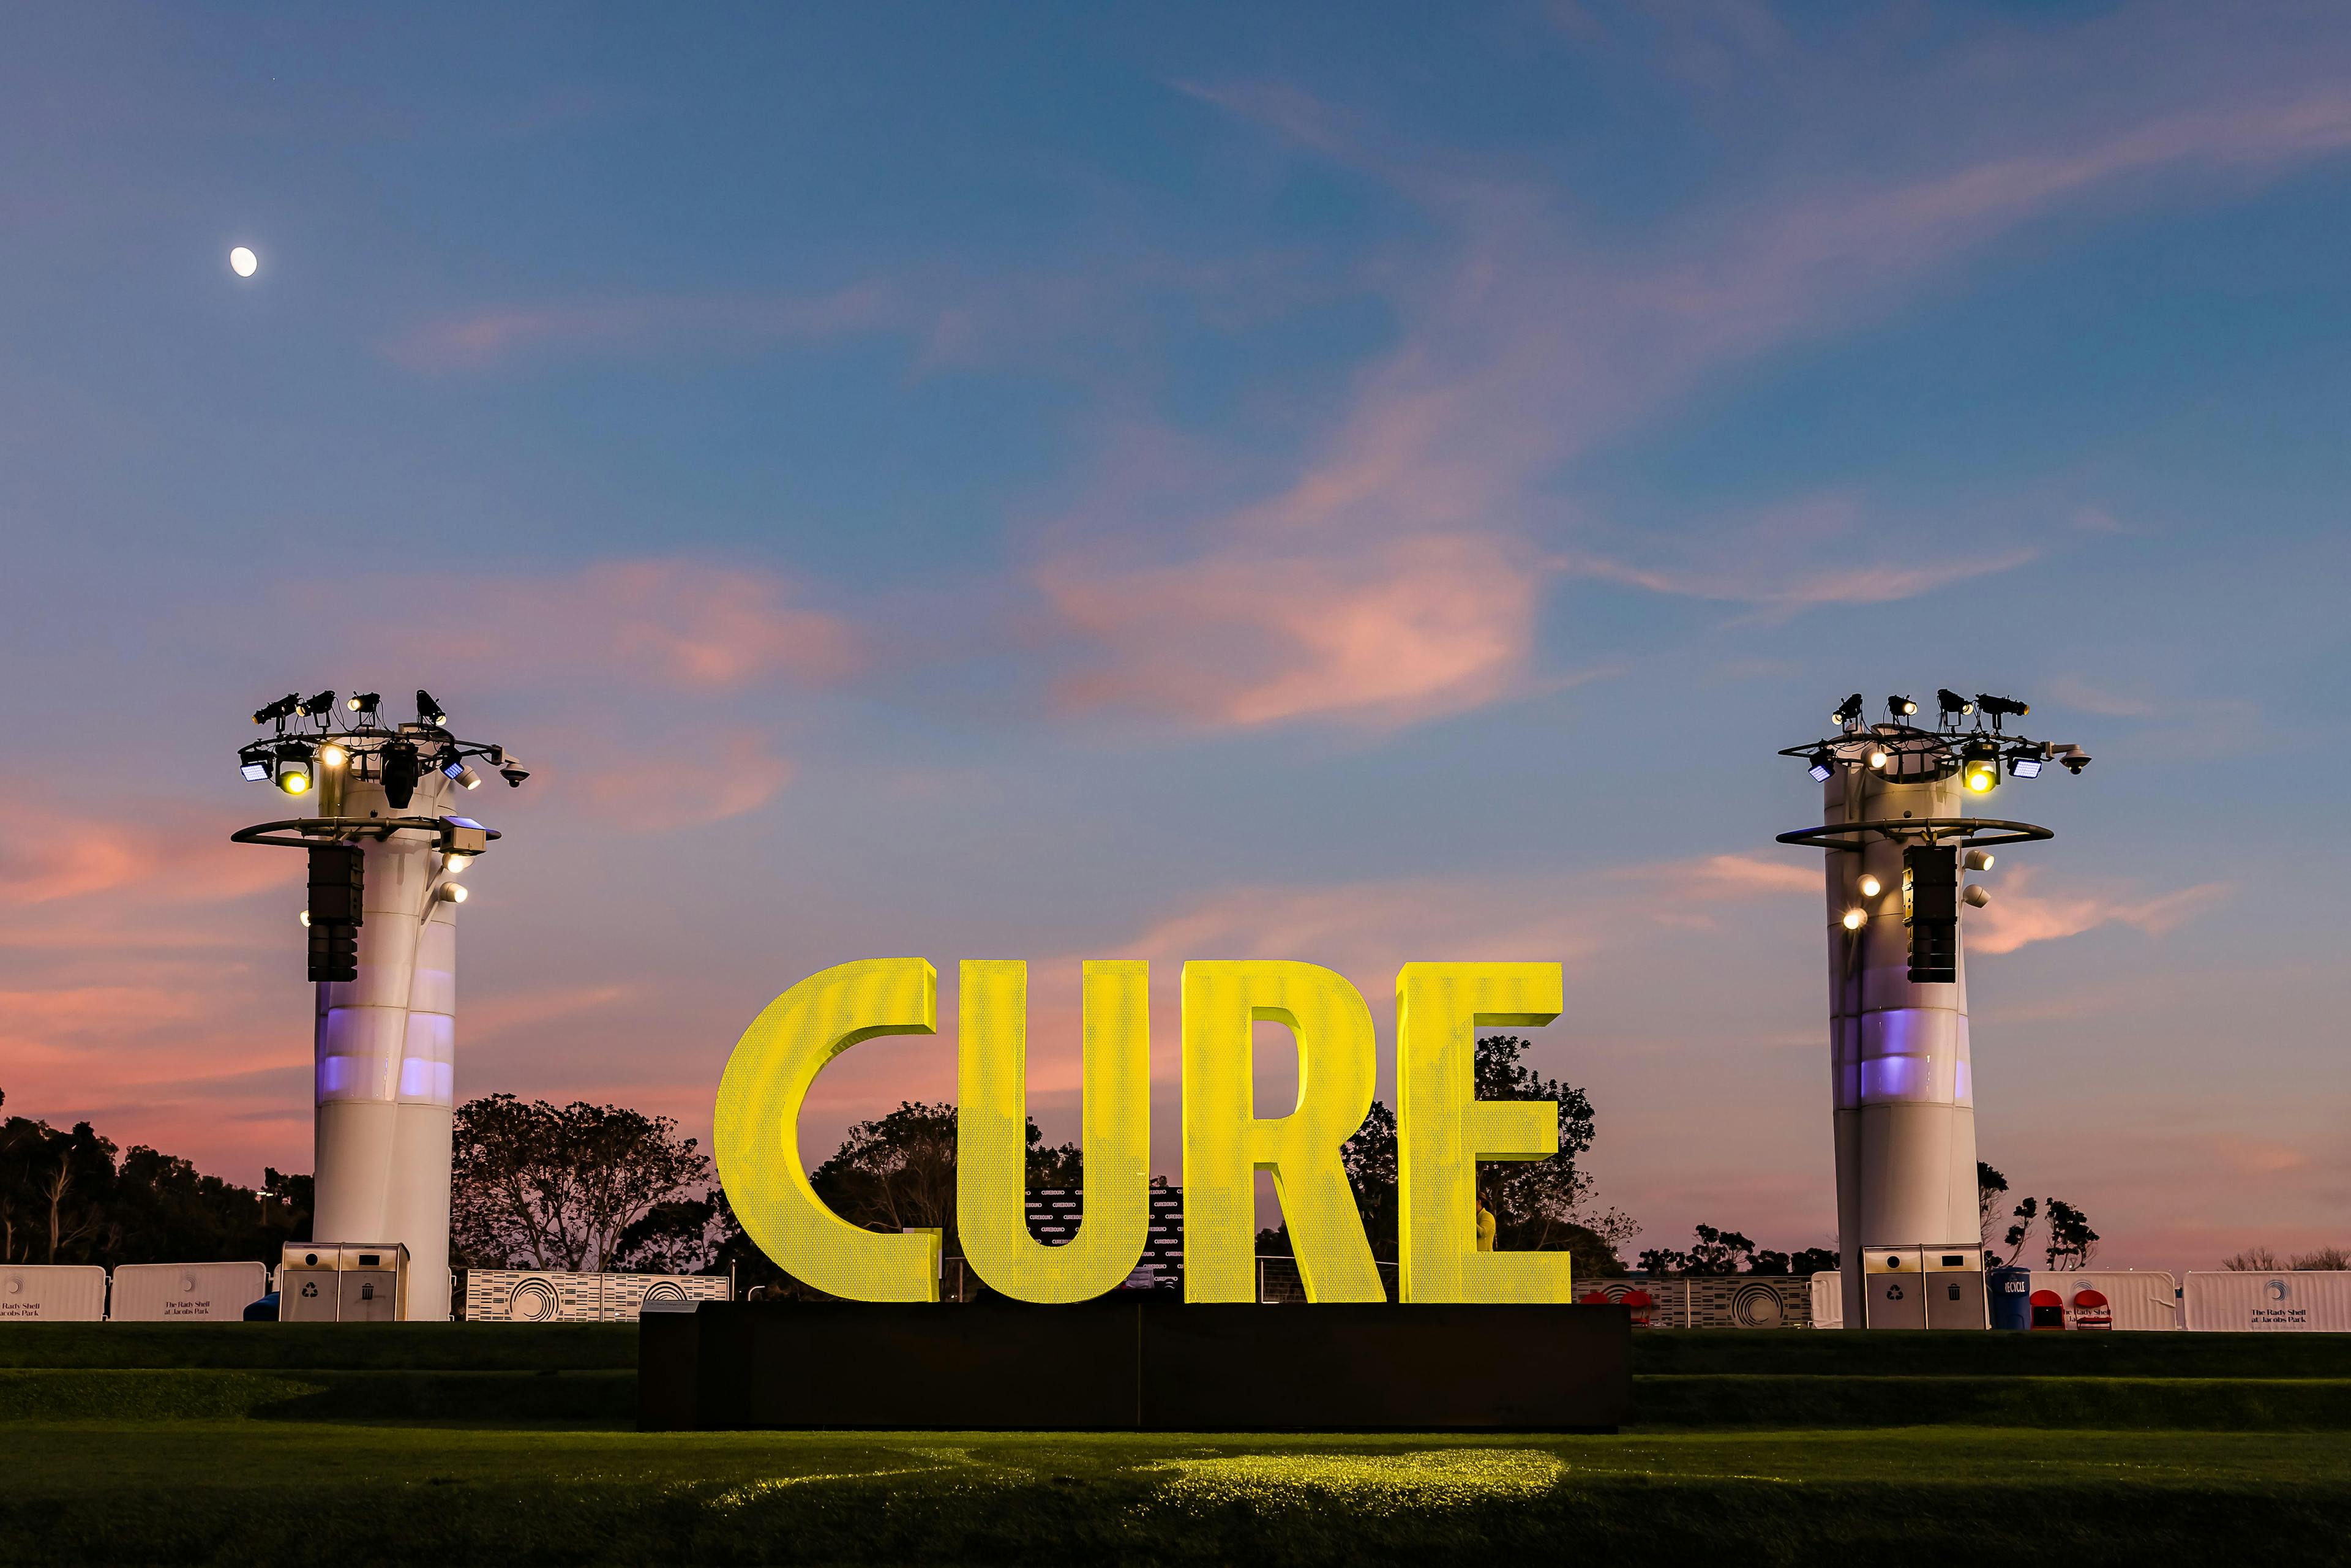 Concert for Cures featured in Giving Back Magazine undefined